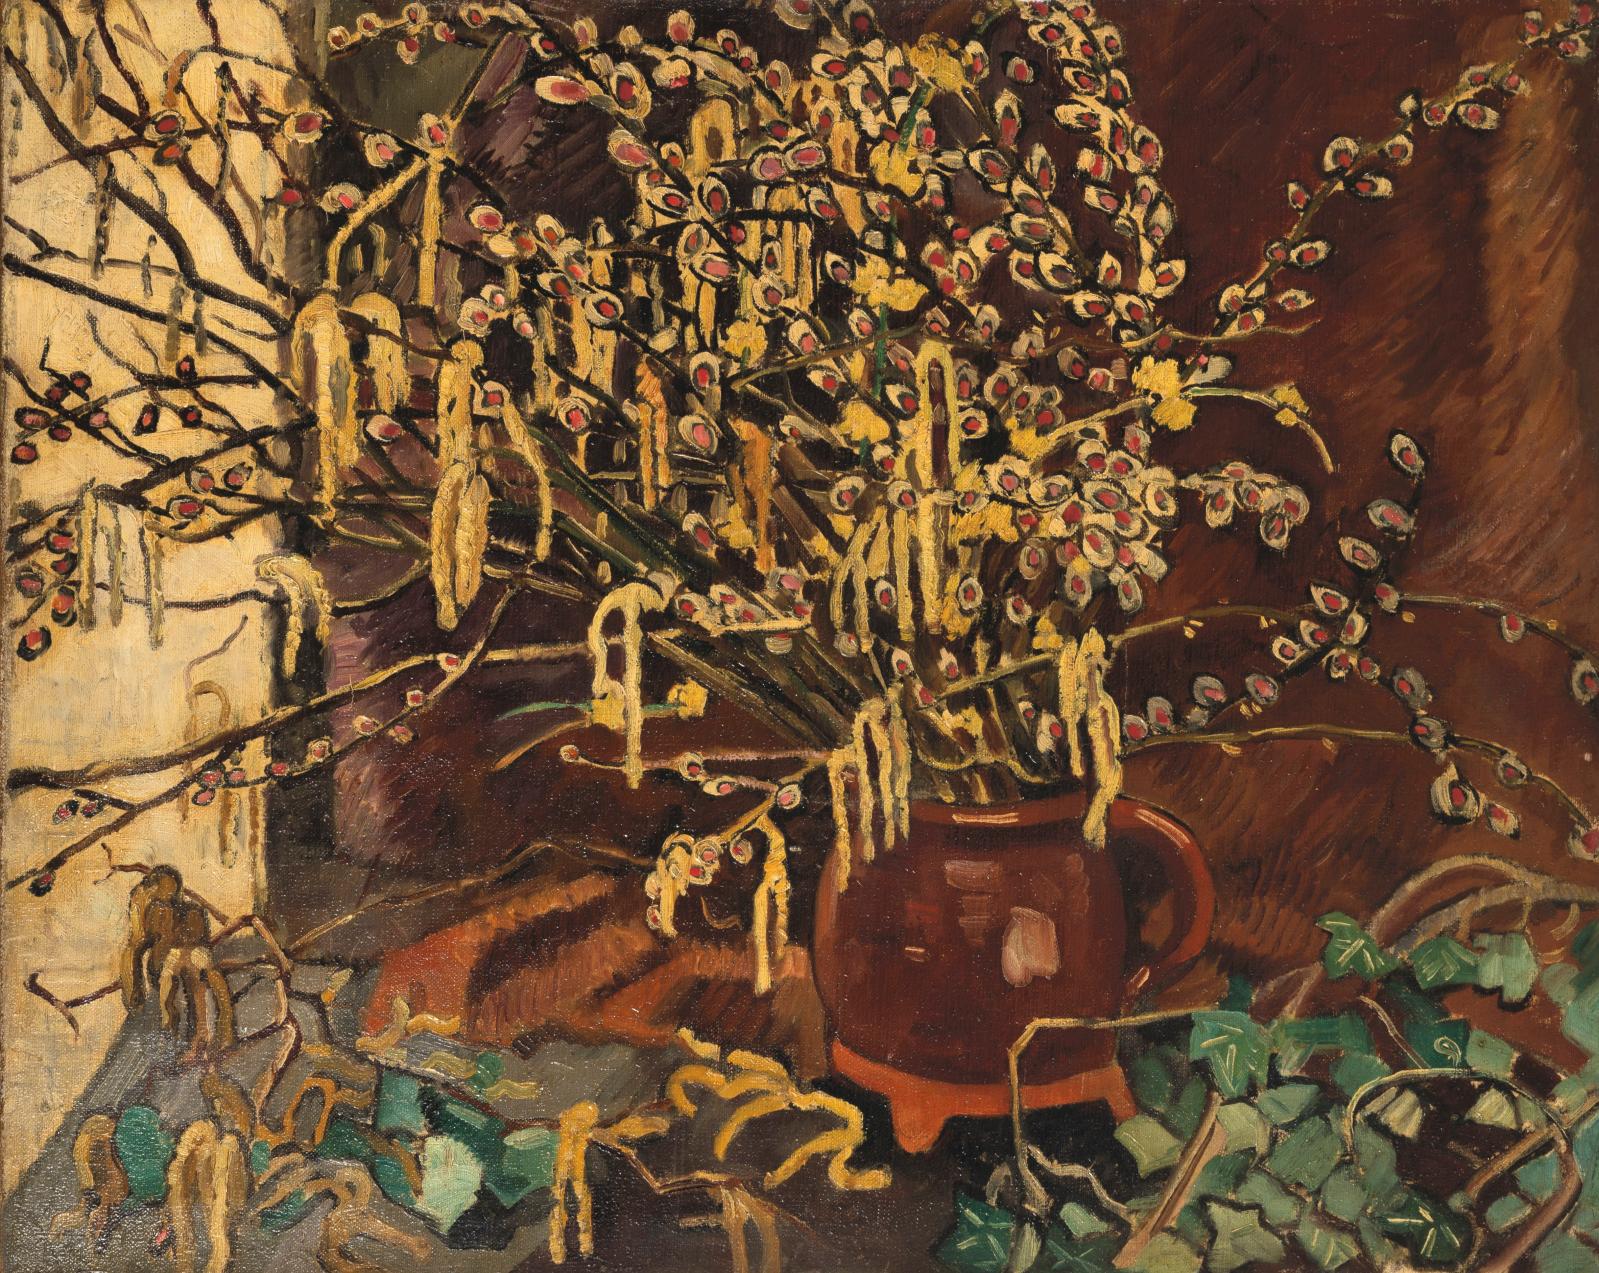 The Personal Path of Louis Valtat in 1920